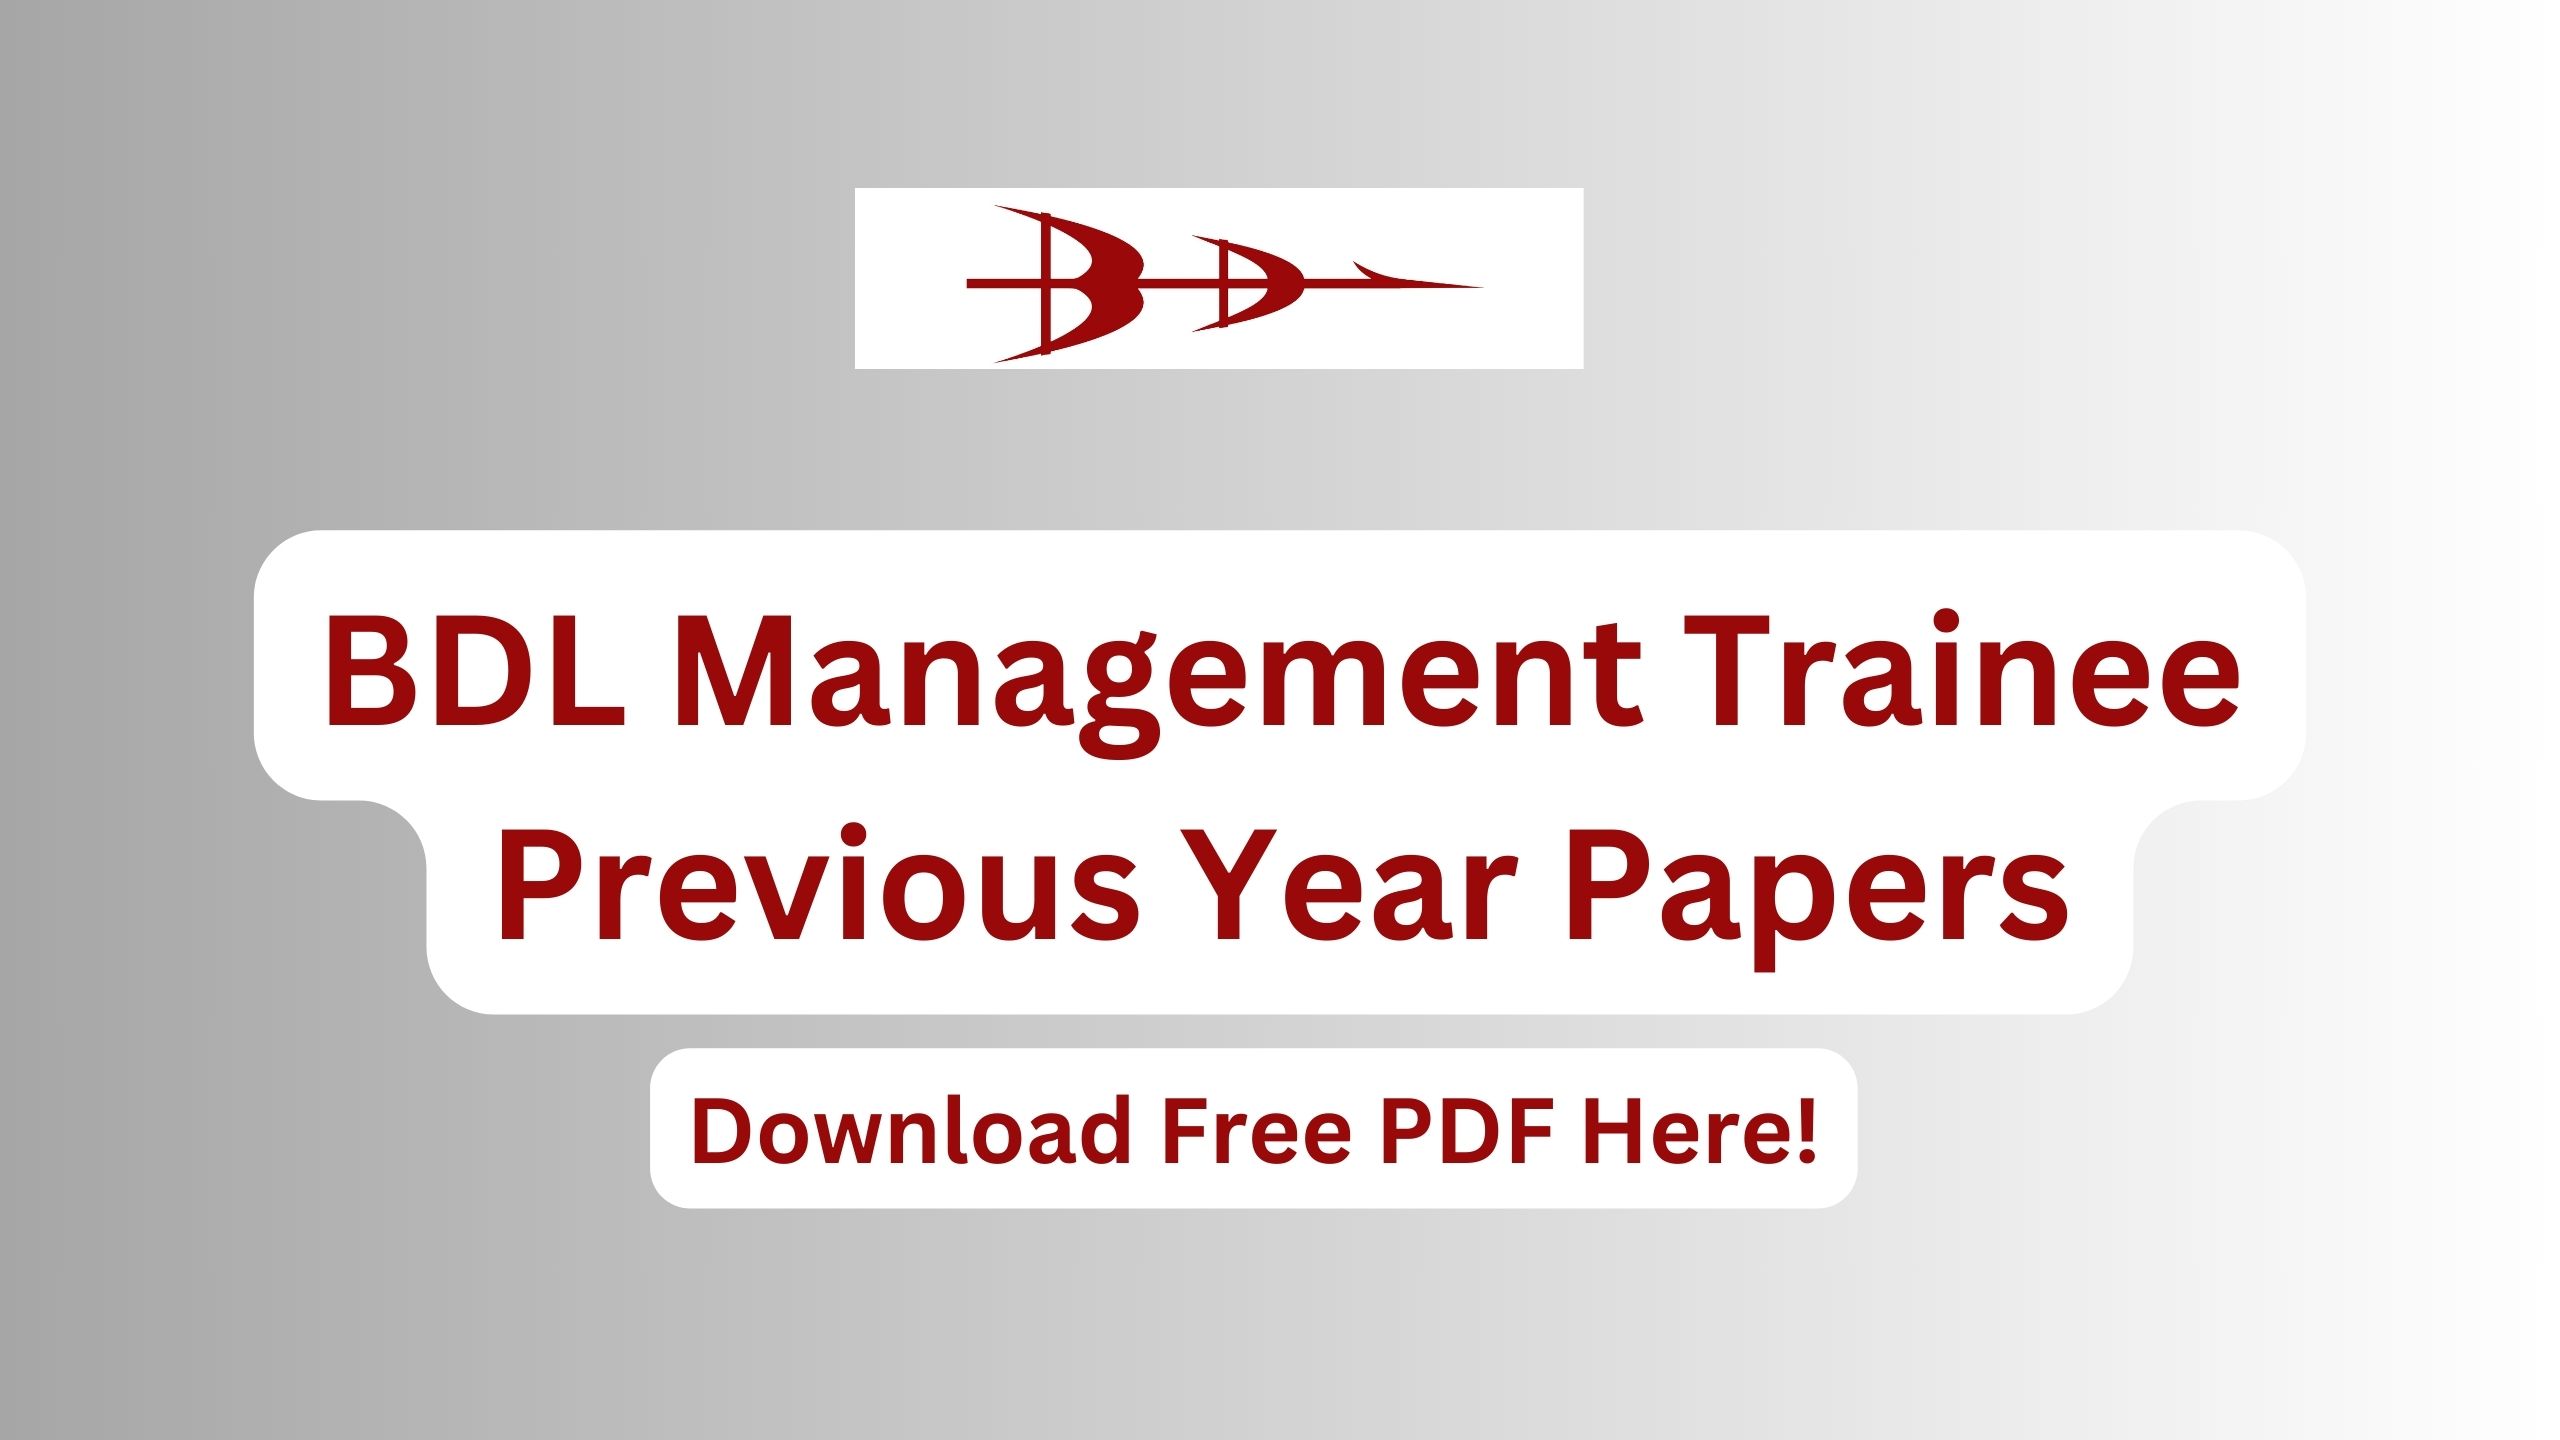 BDL Management Trainee Previous Year Papers